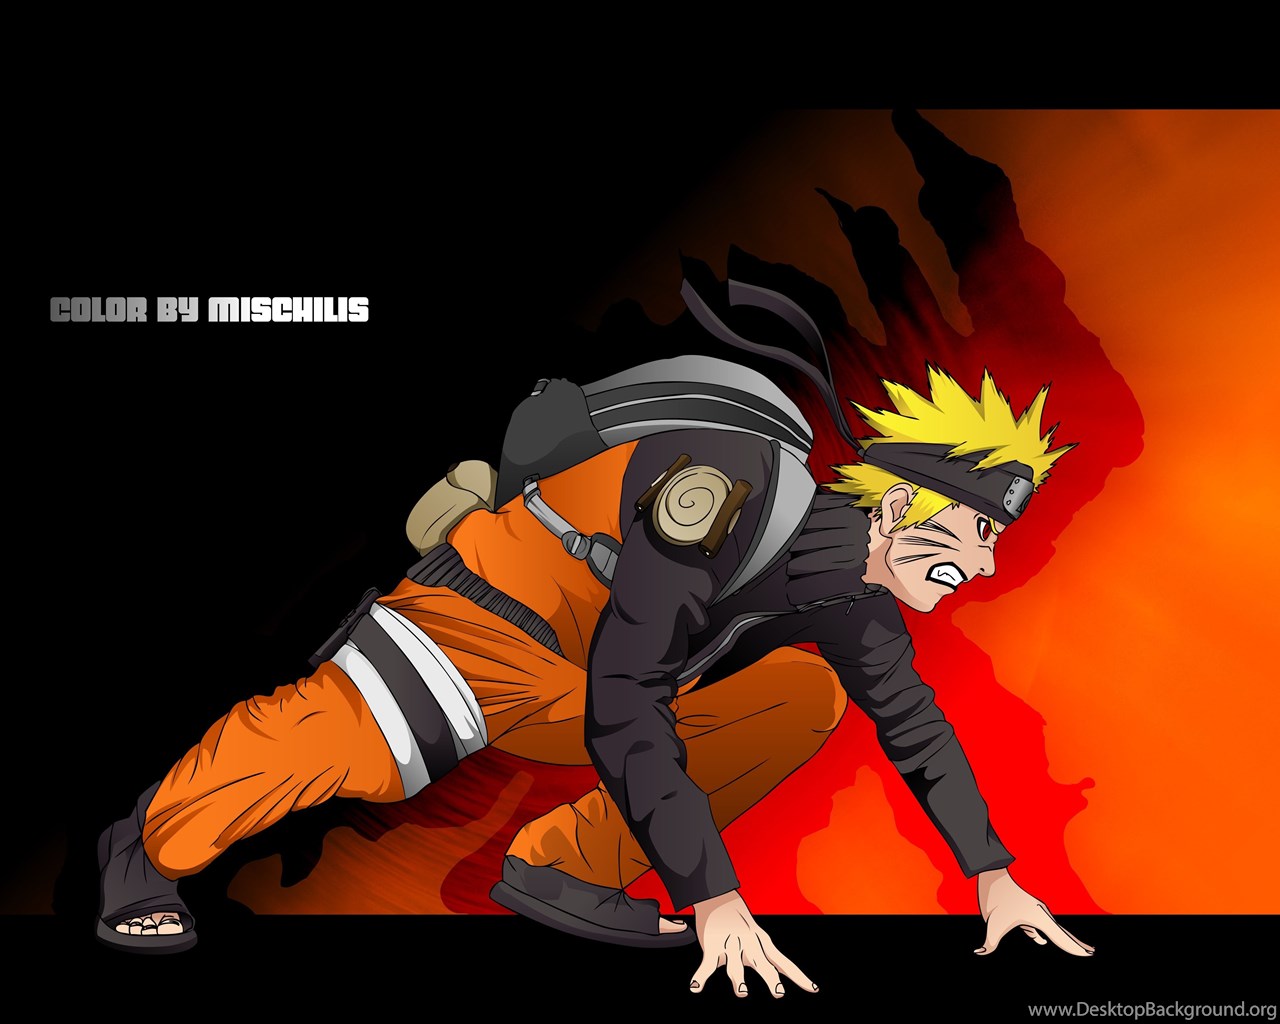 New Great Full HD Naruto WallpaperS ANIME ATTACK Desktop Background